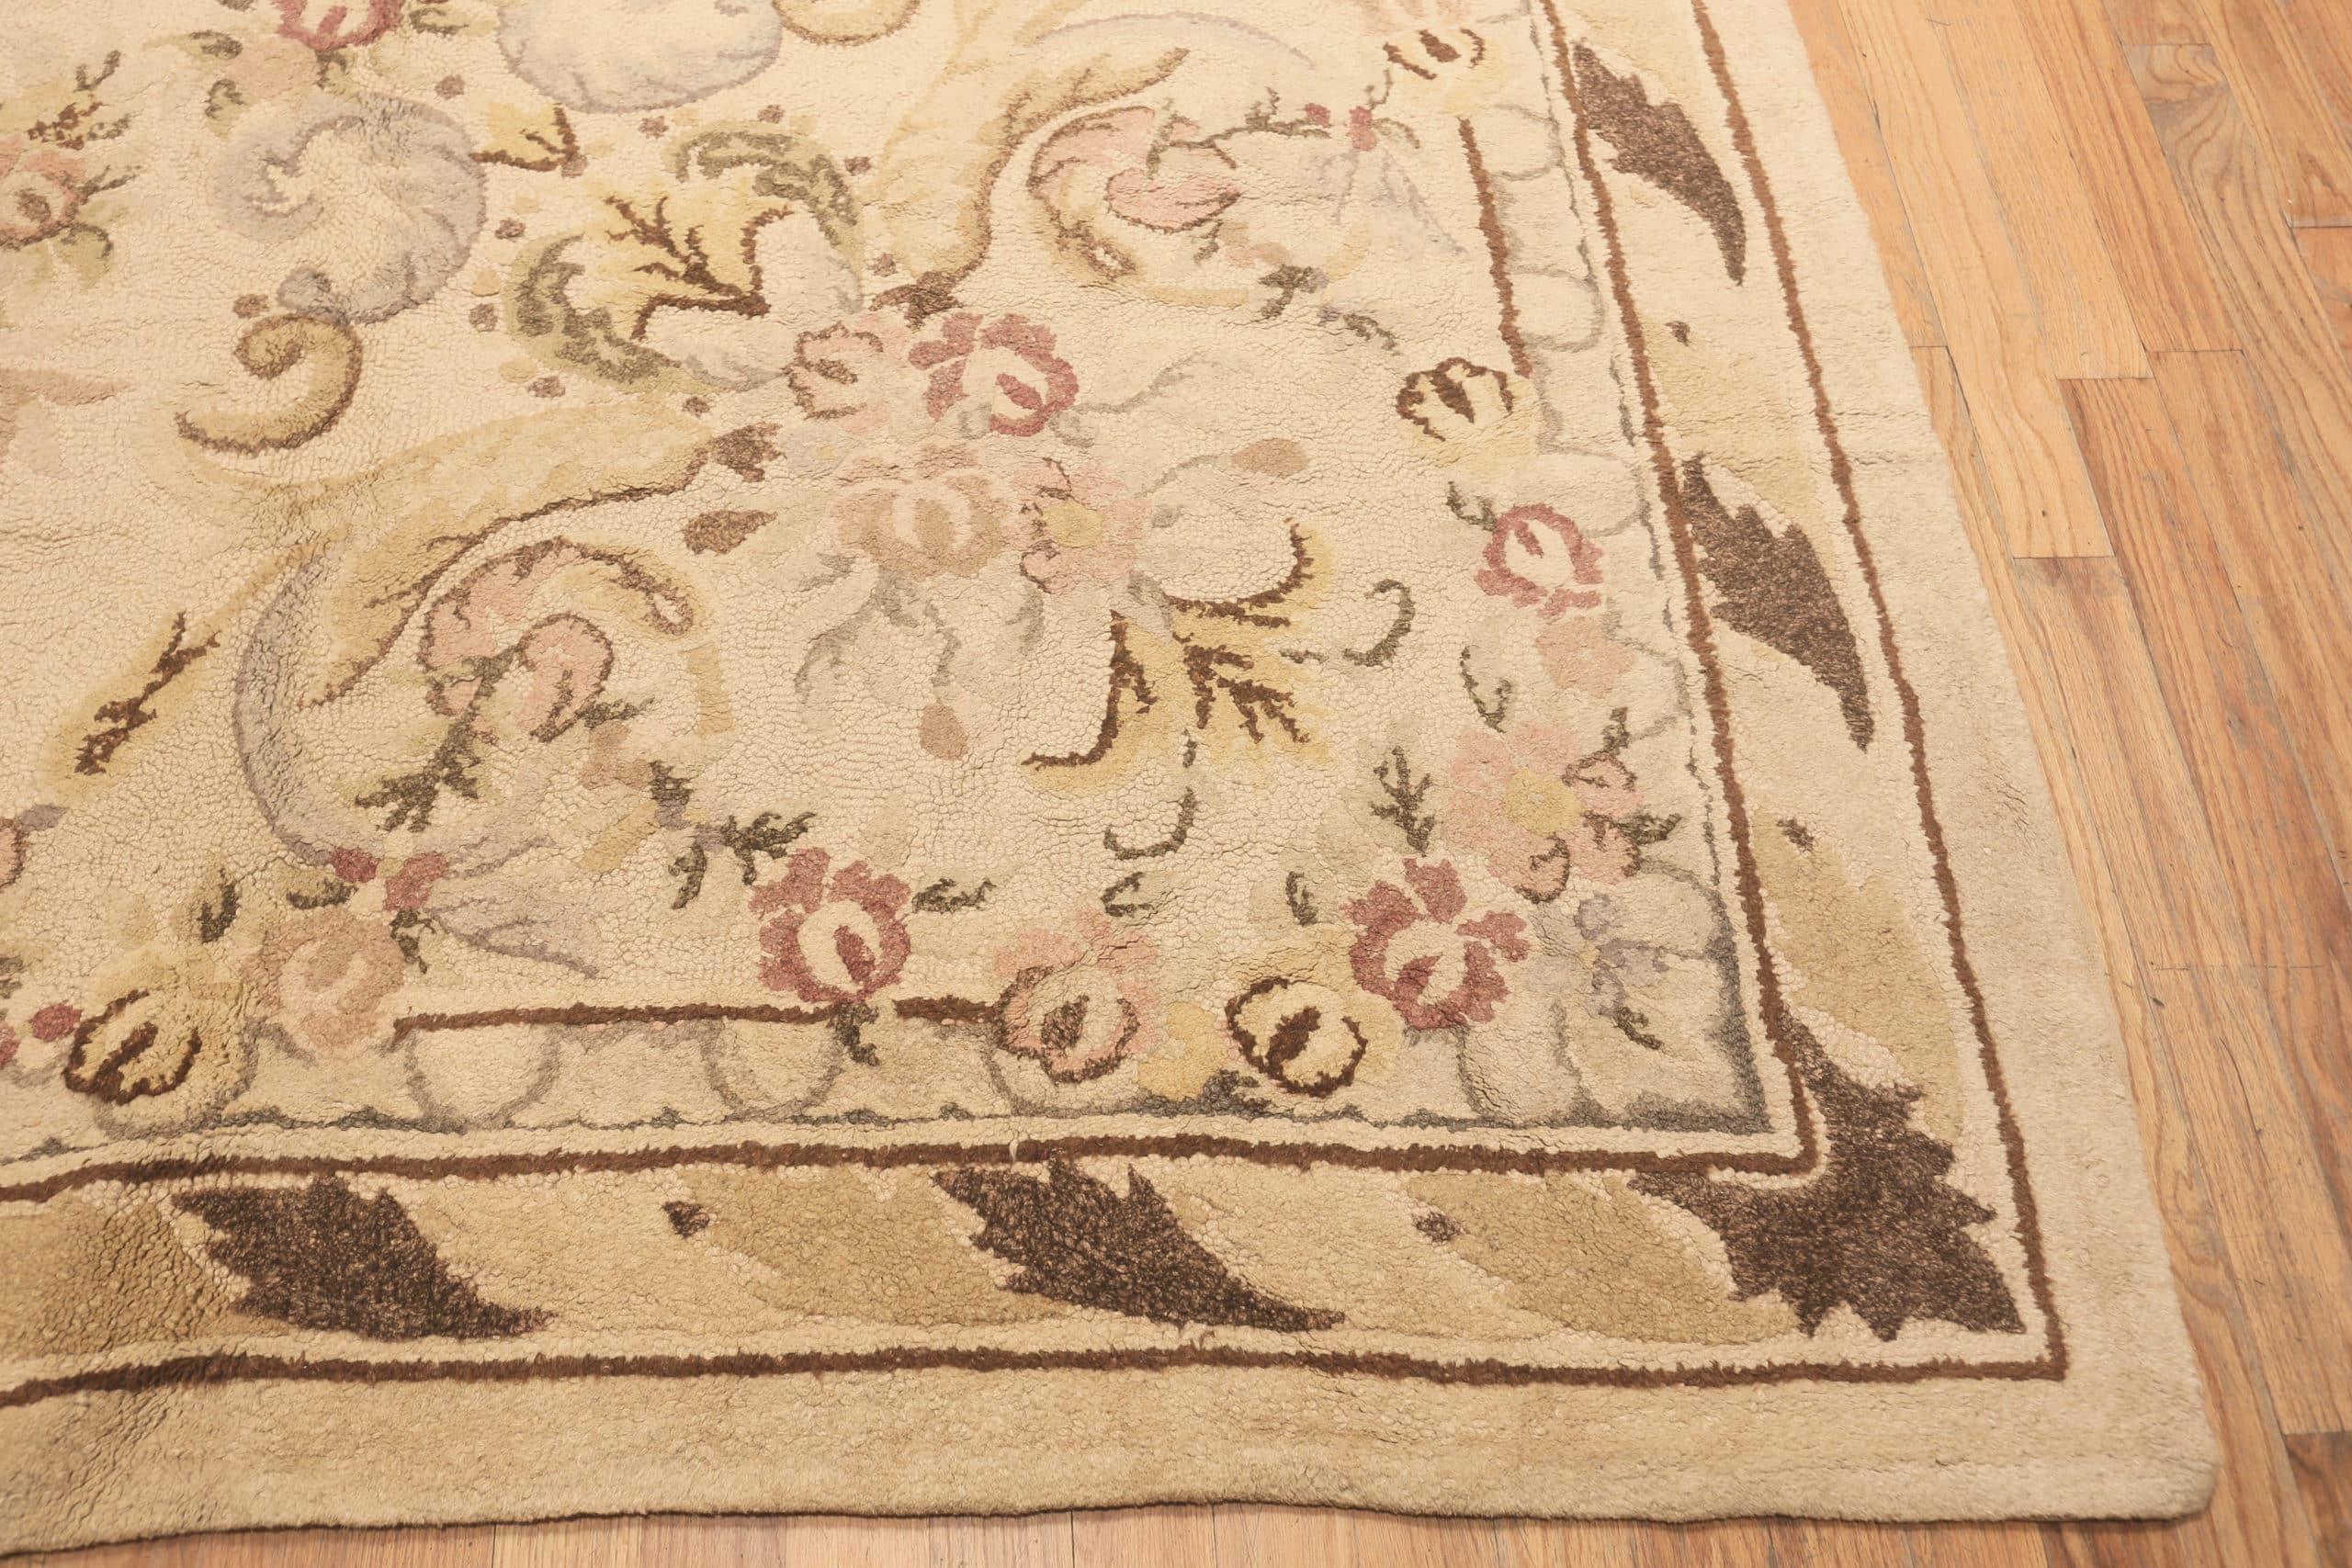 20th Century Floral Design Antique Ivory Oversized American Hooked Rug 12'4